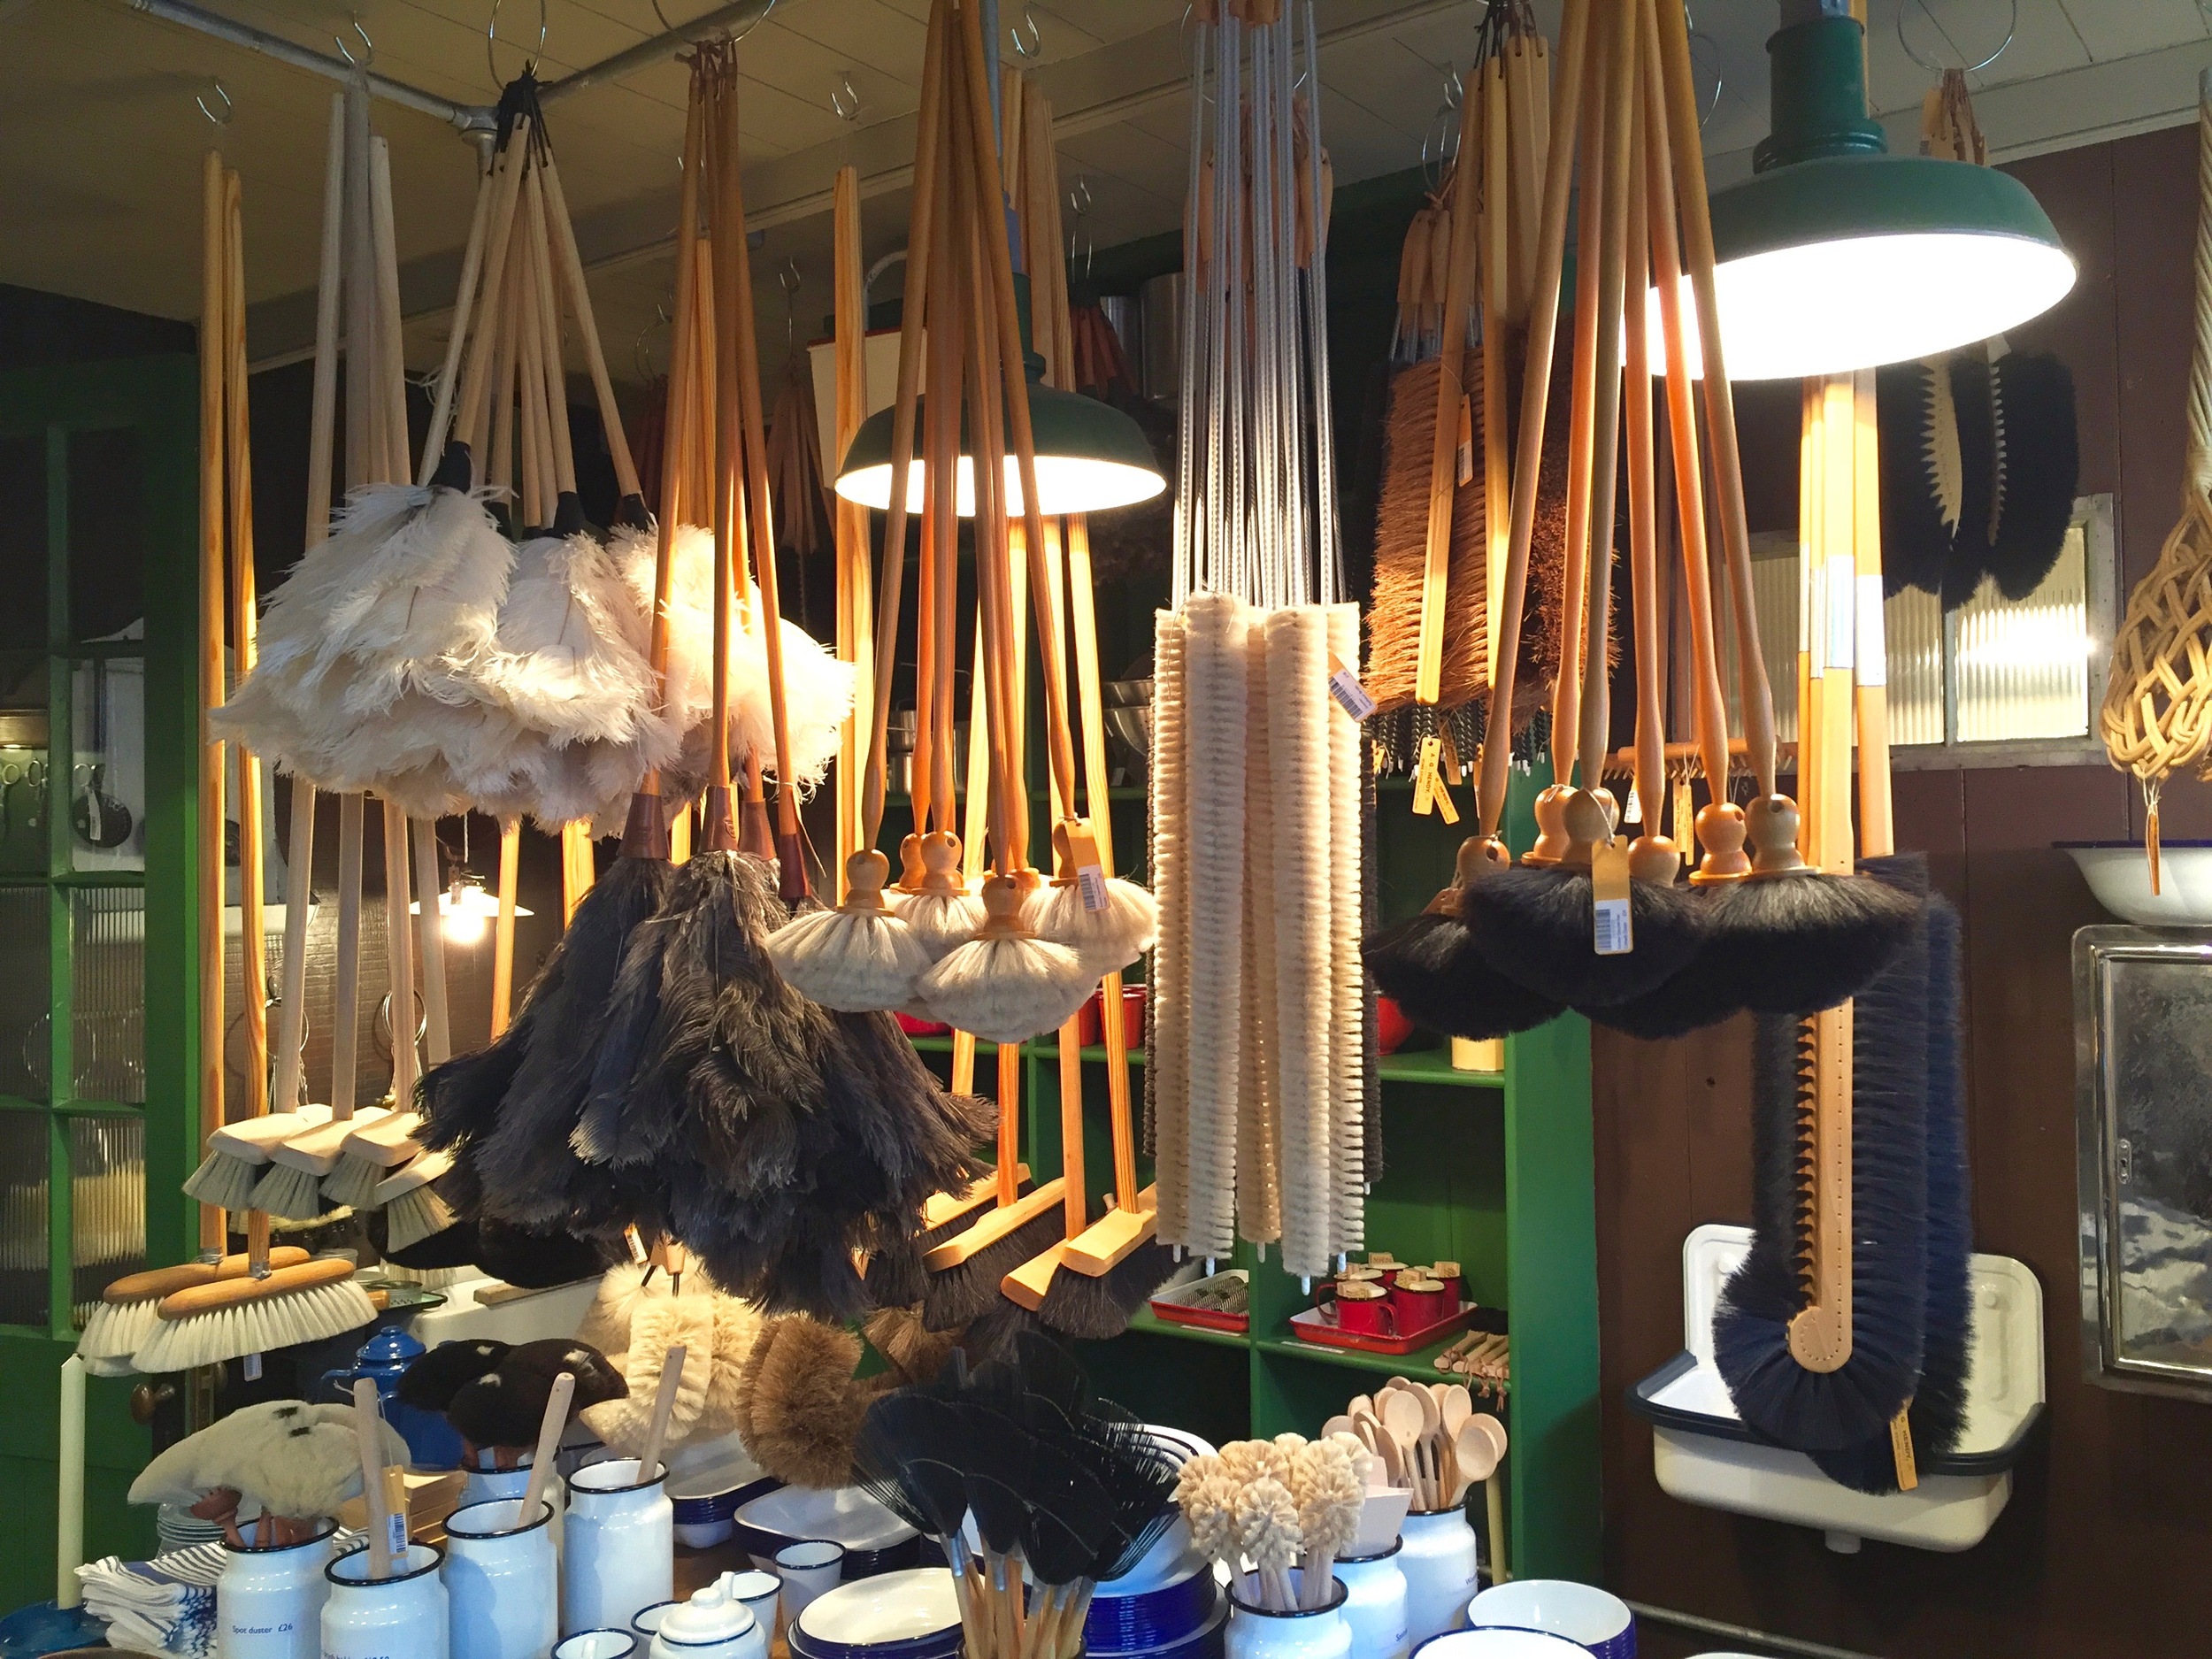 There's an abundance of Brooms, Dusters & Brushes.